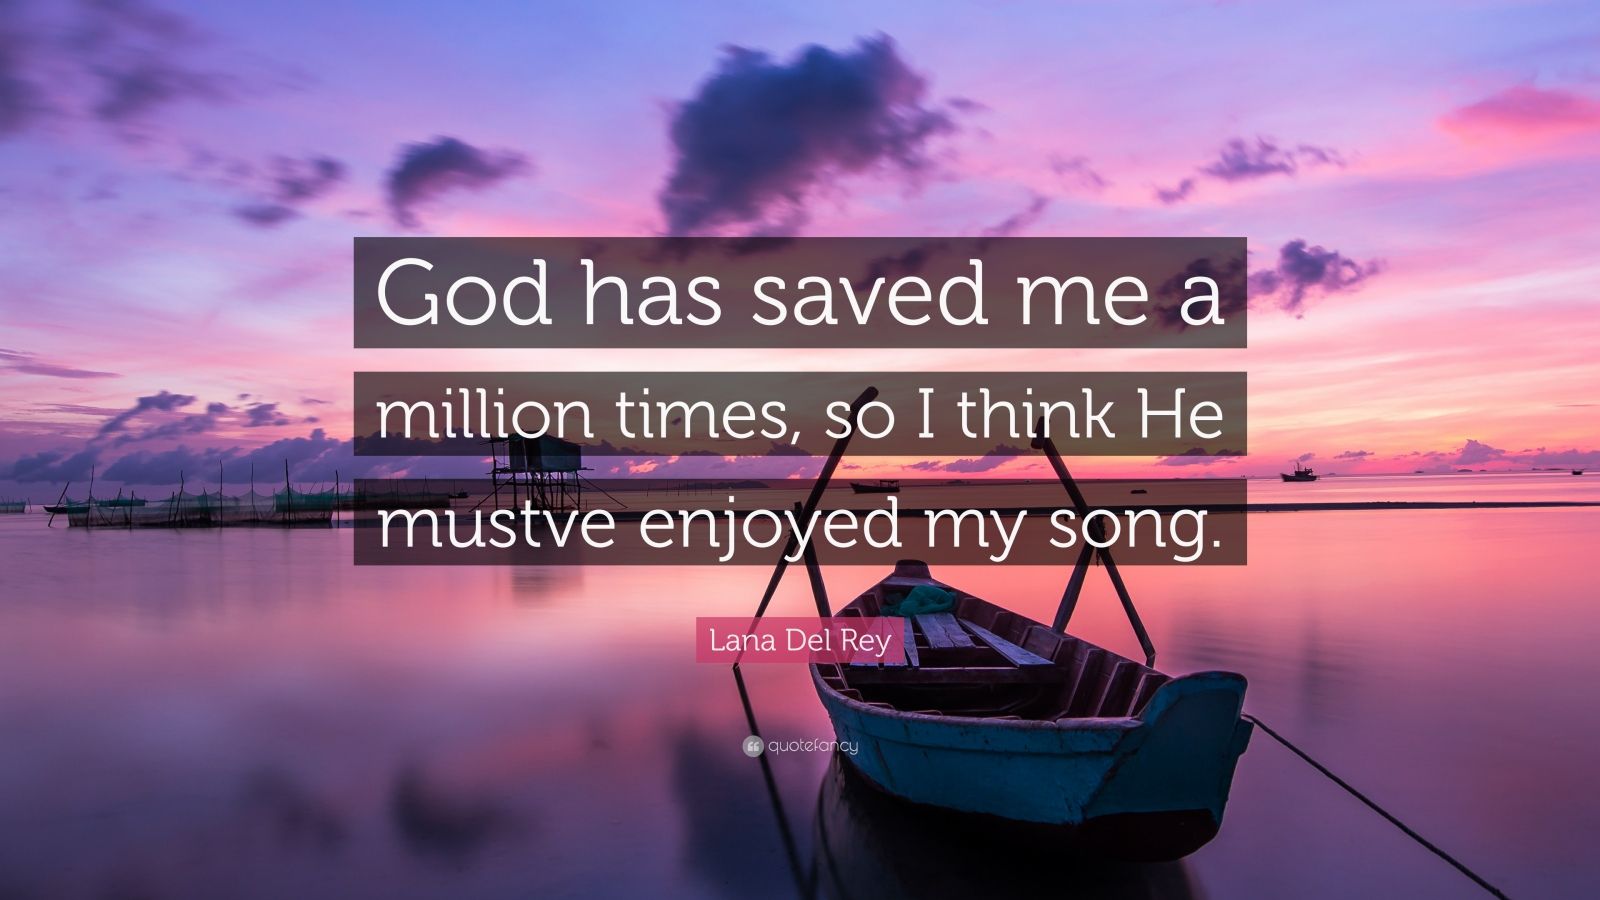 Lana Del Rey Quote: "God has saved me a million times, so ...